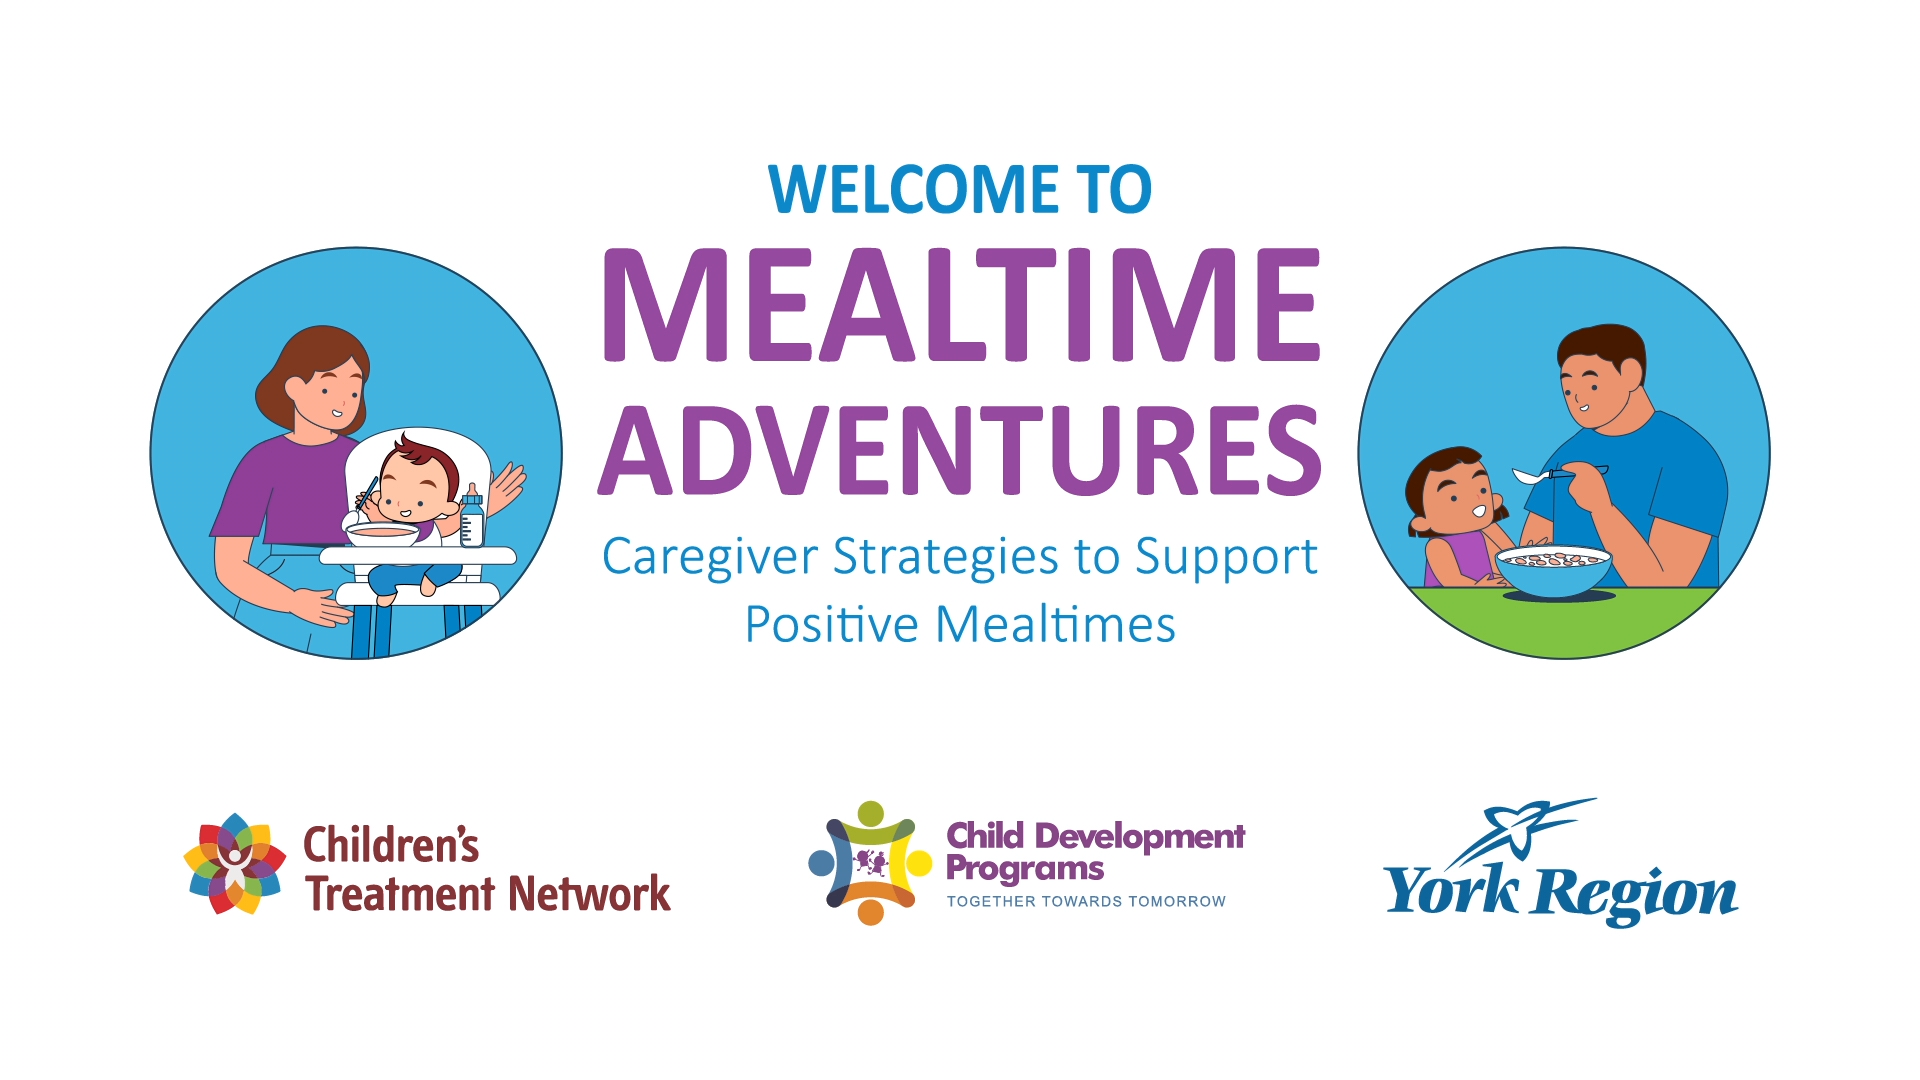 Caregiver strategies to support positive mealtimes for kids and families